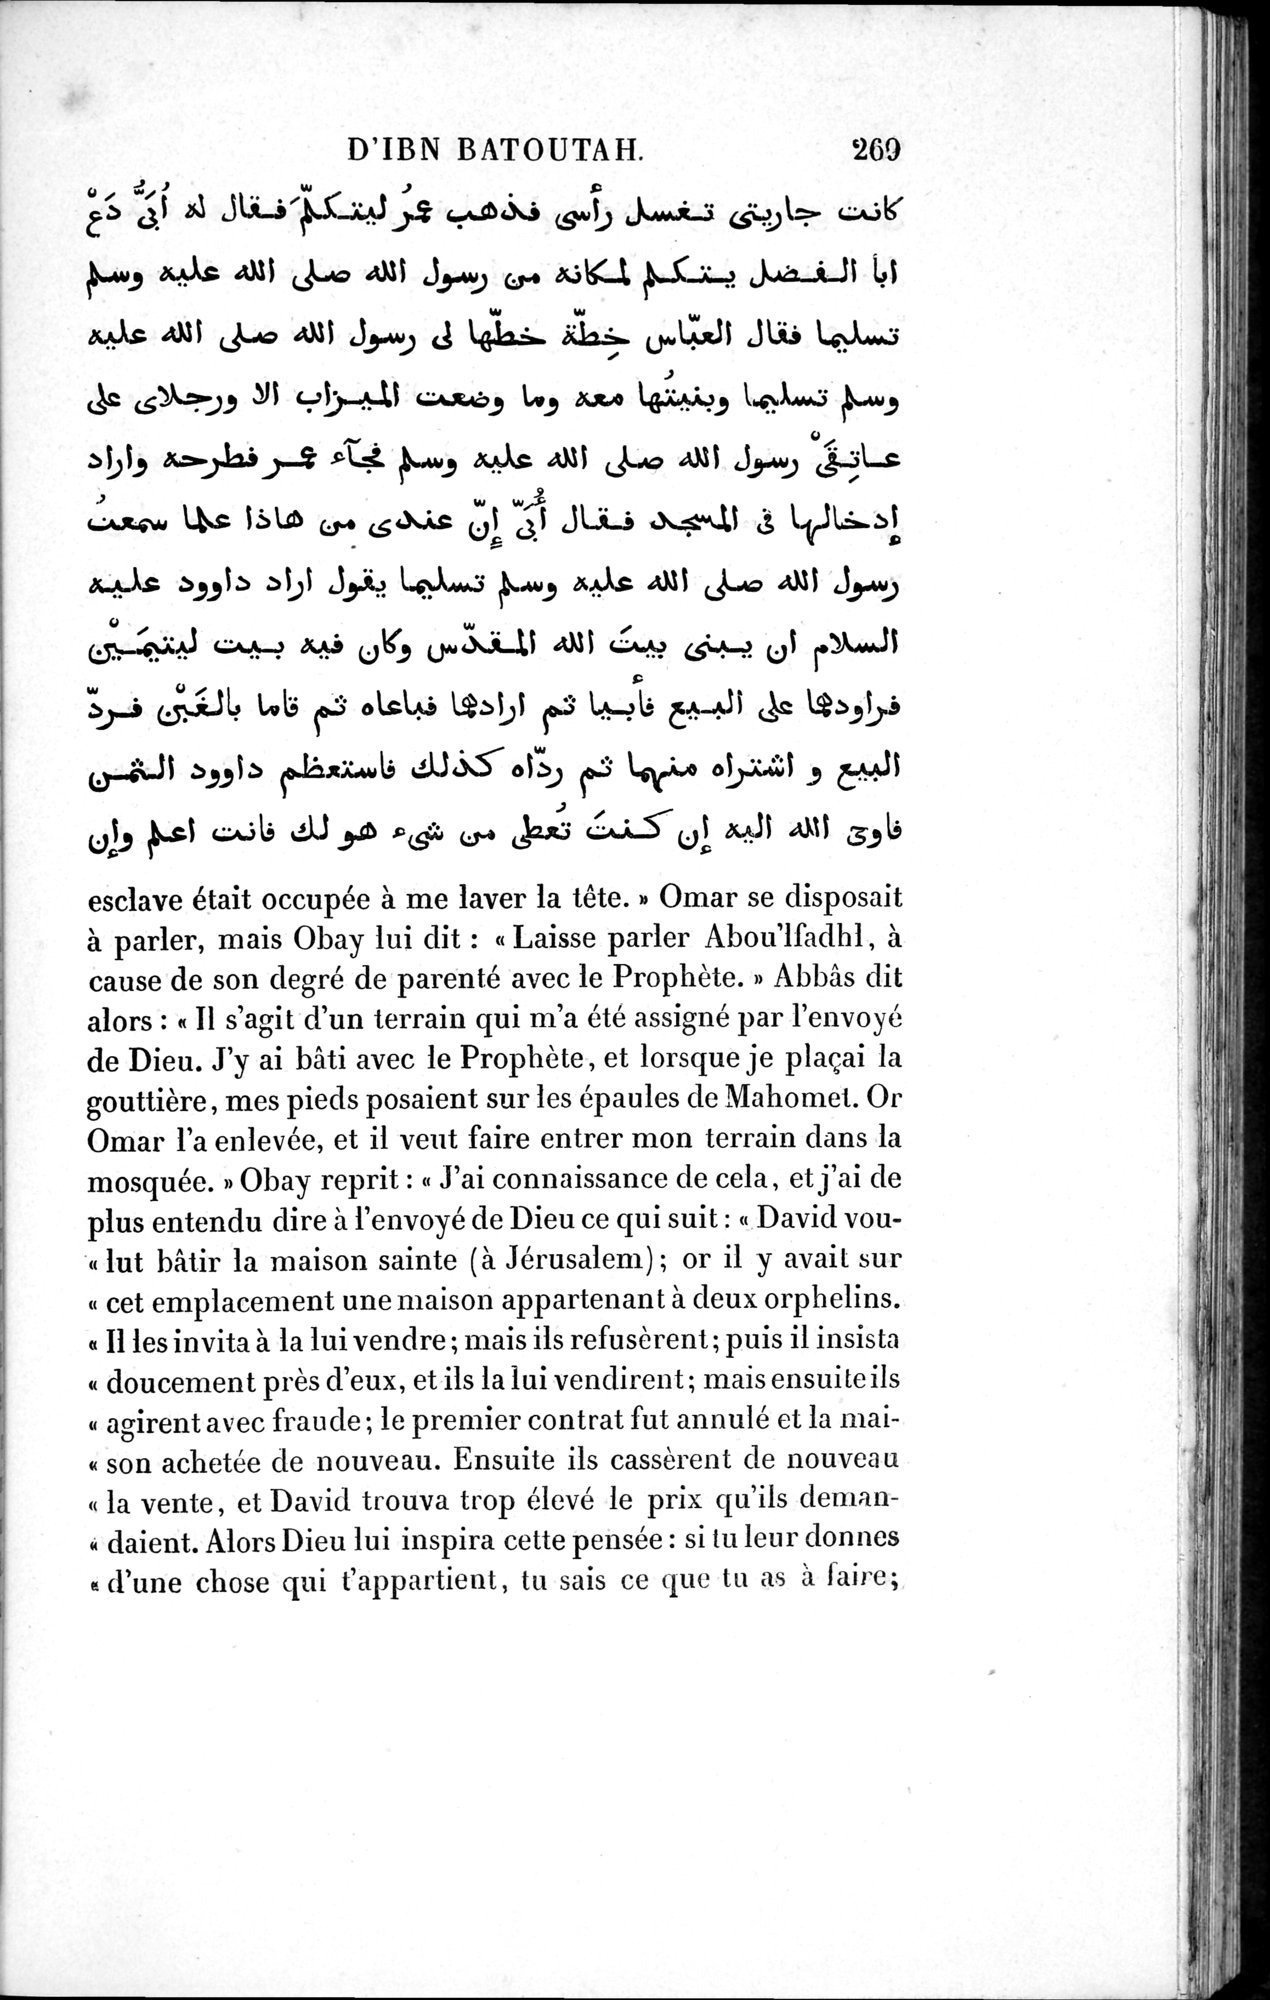 Voyages d'Ibn Batoutah : vol.1 / Page 329 (Grayscale High Resolution Image)